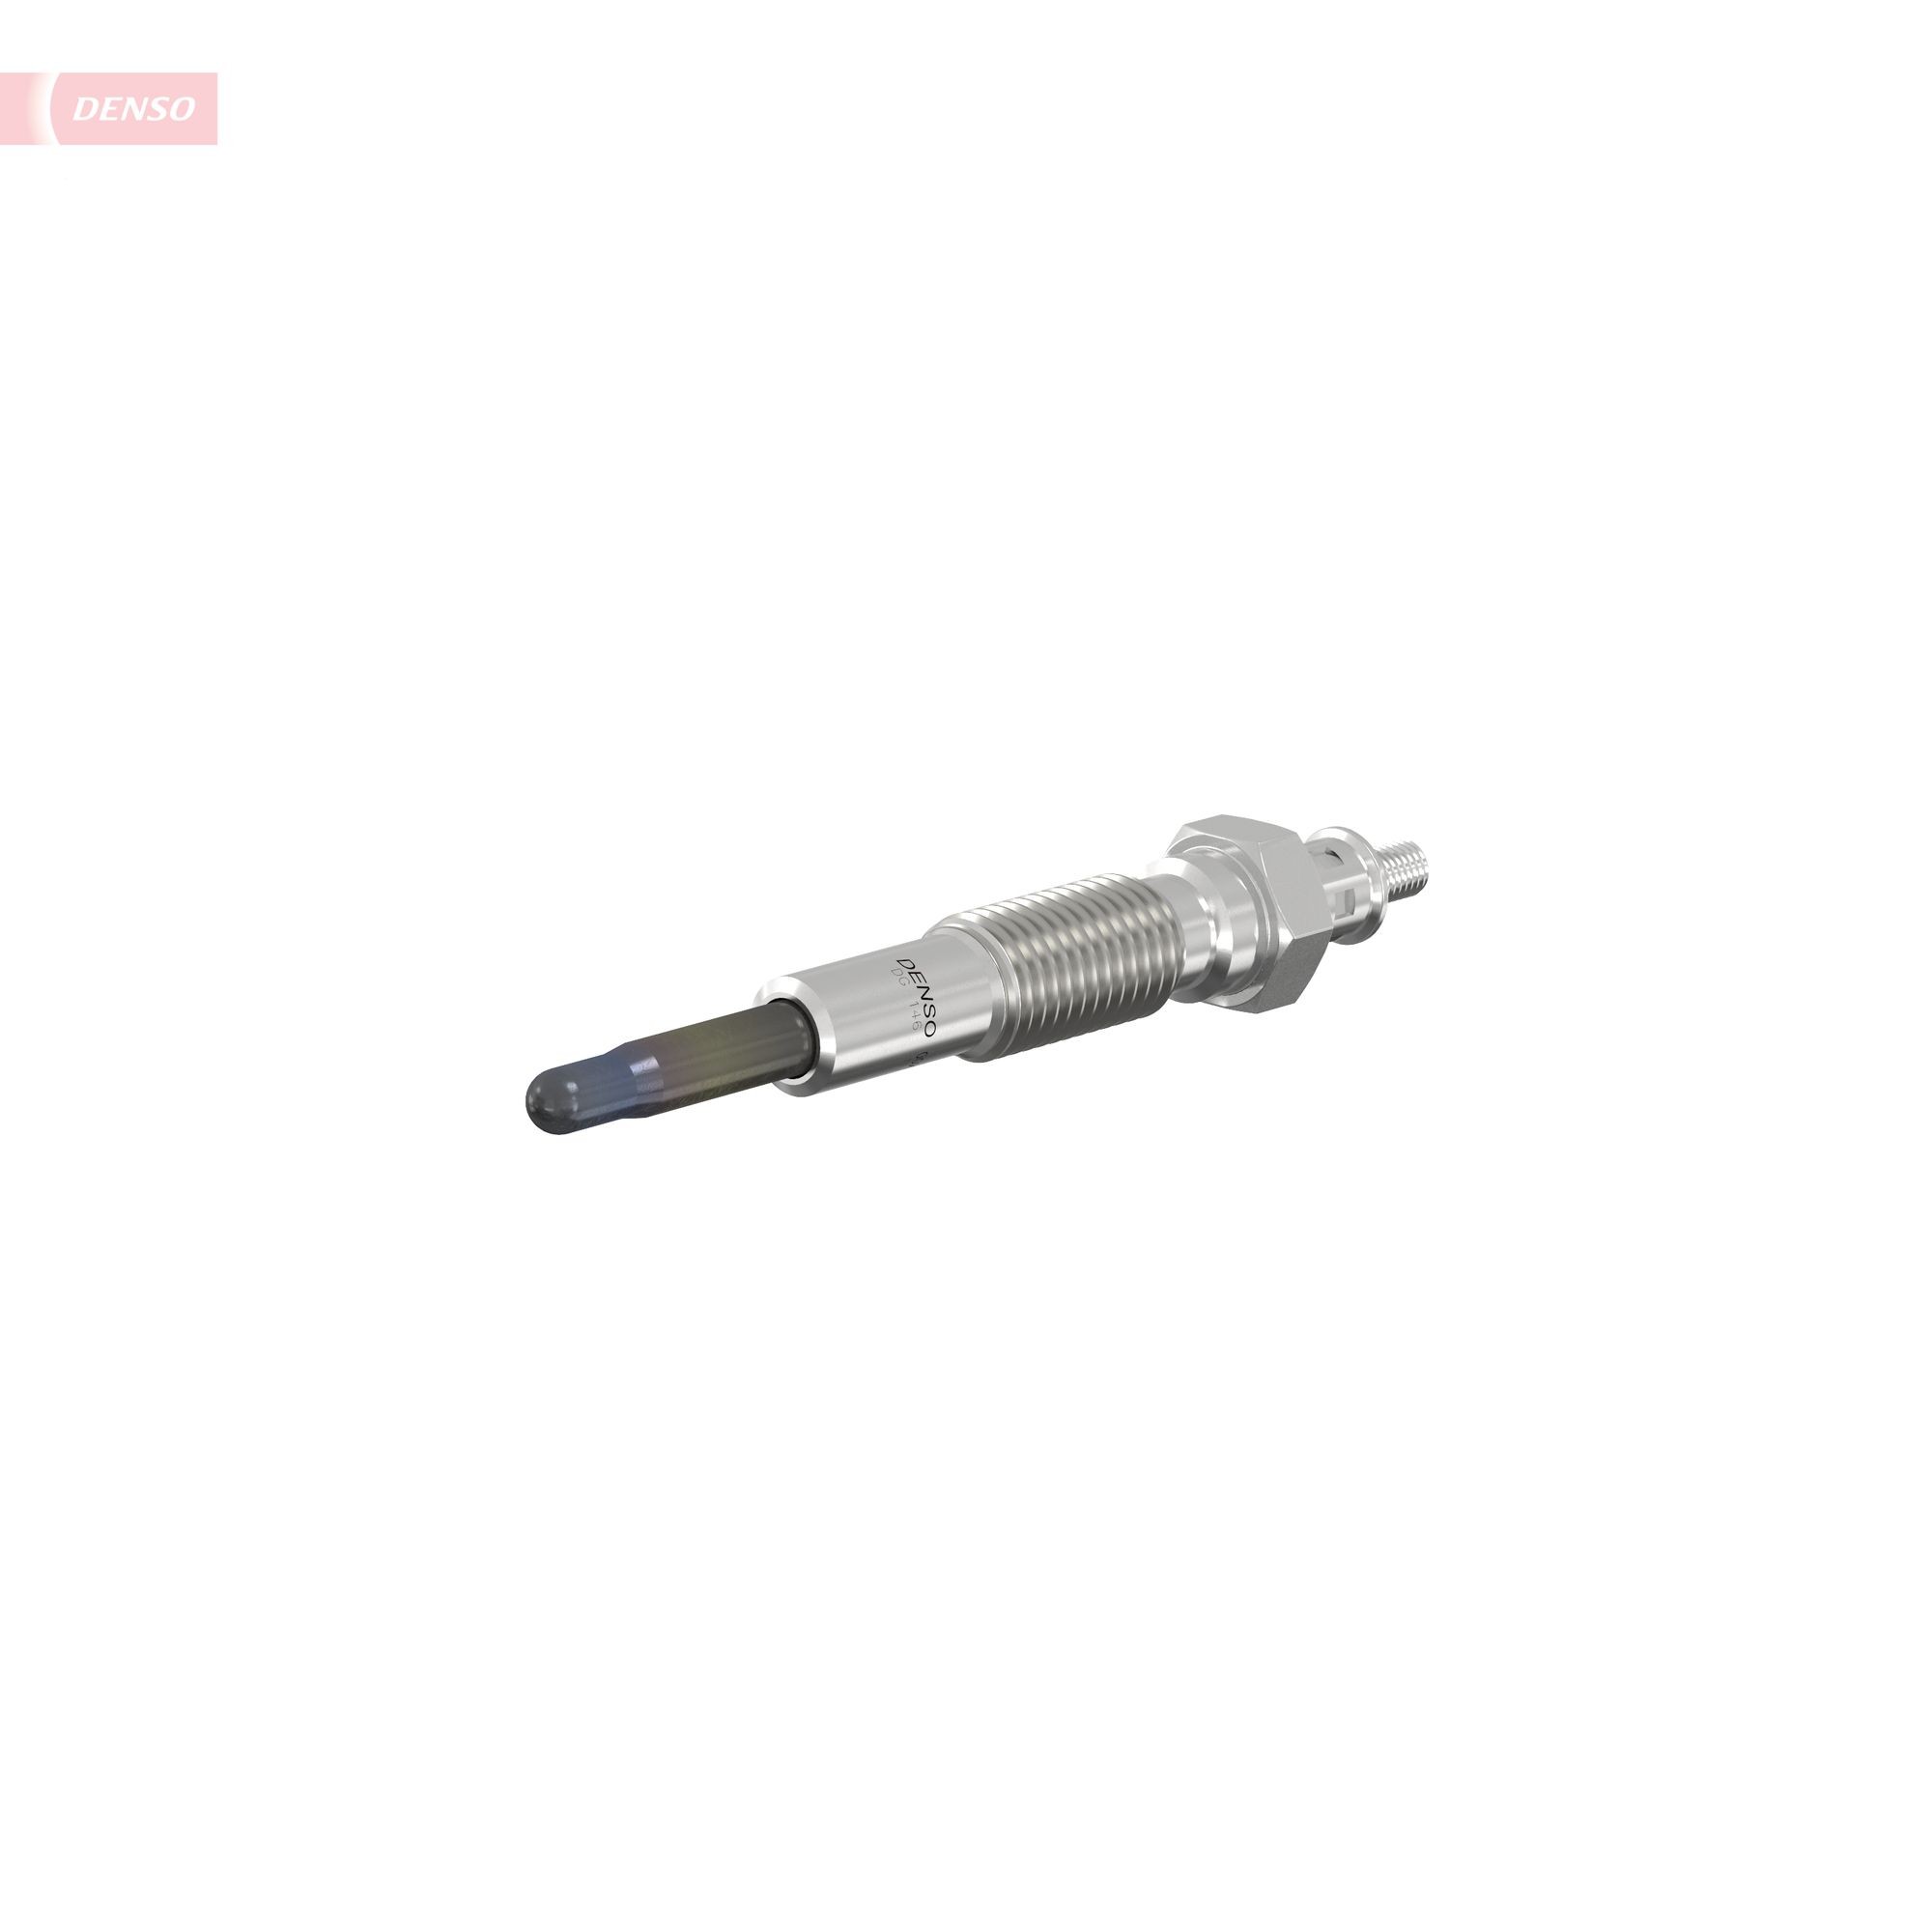 Great value for money - DENSO Glow plug DG-146